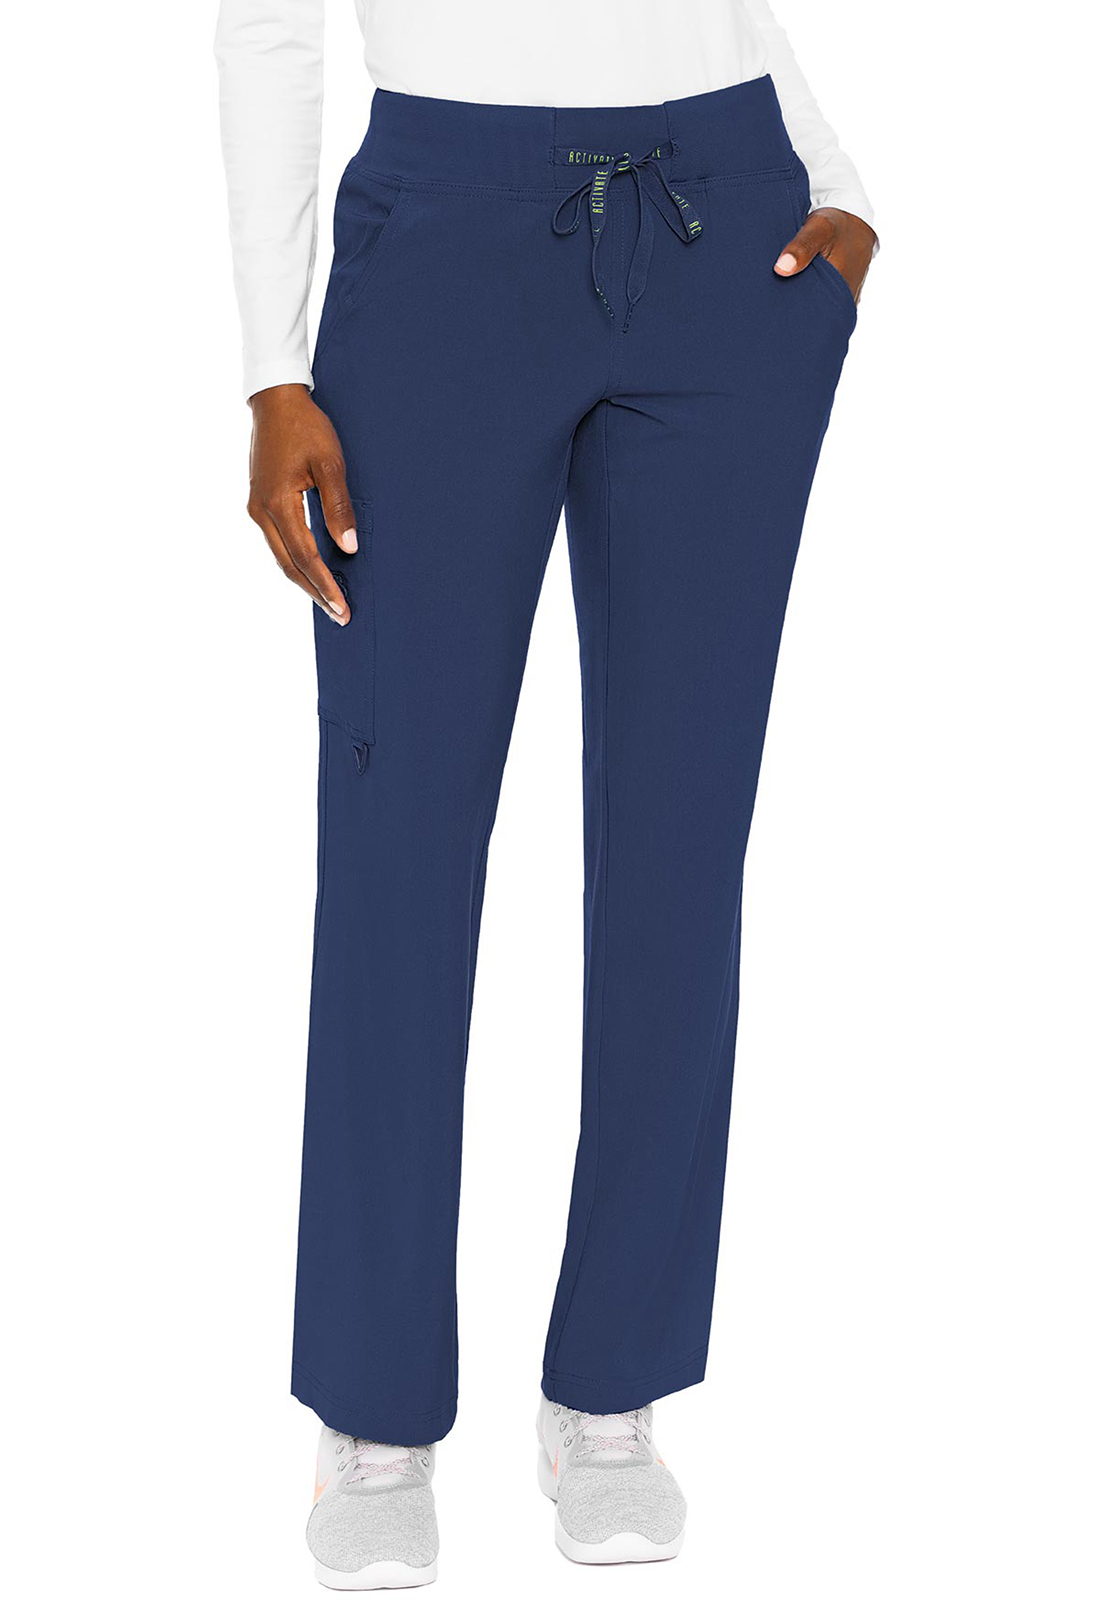 Yoga 1 Cargo Pocket Pant-Med Couture